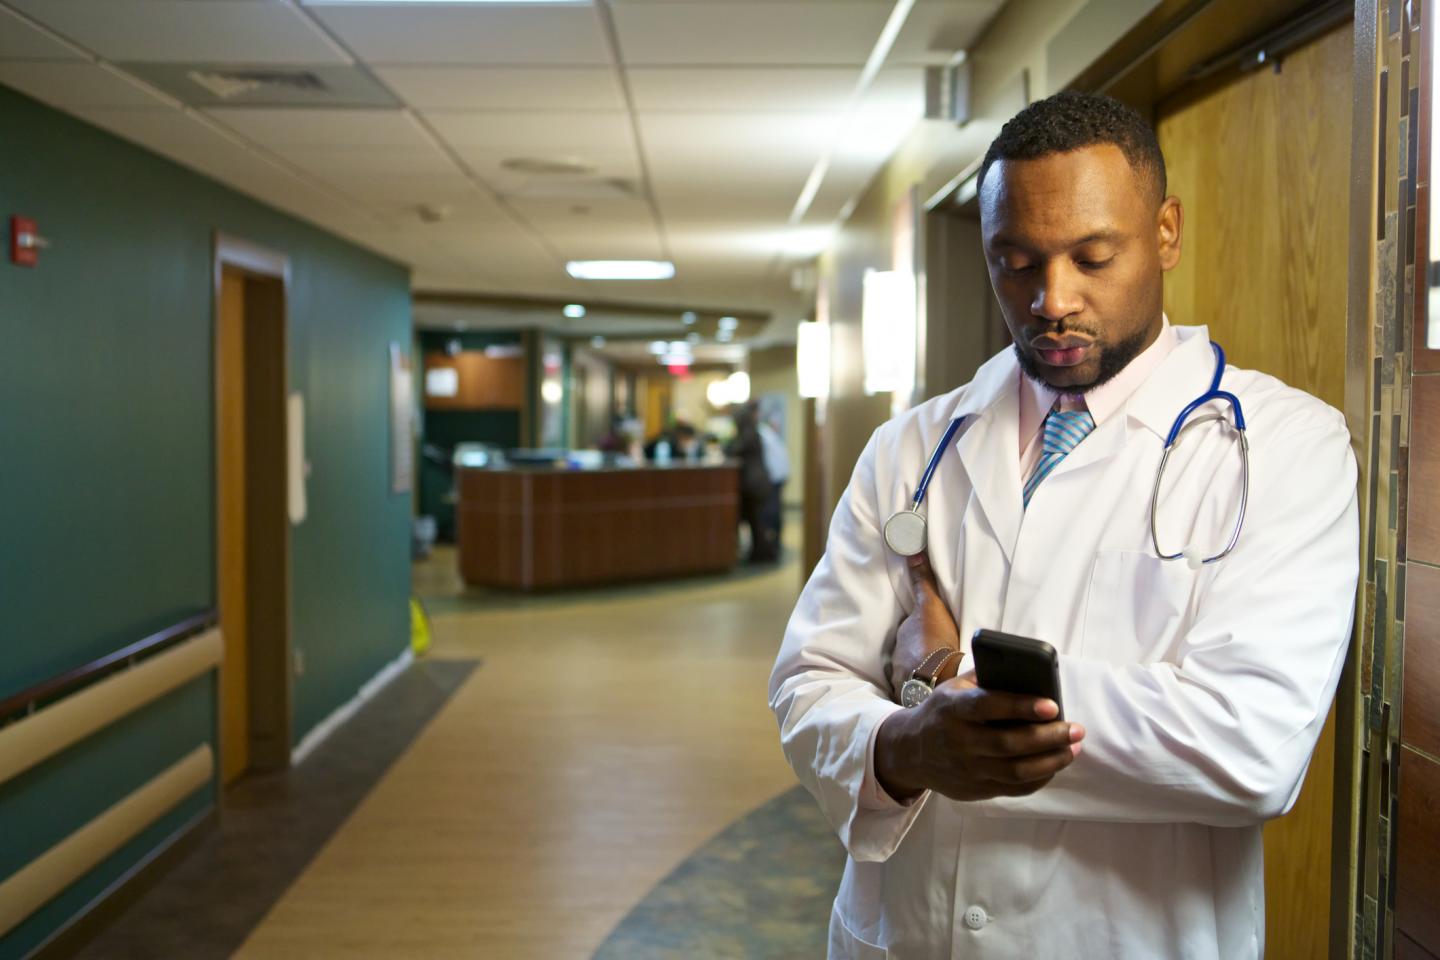 Emergency Physicians Can Use Smartphones to Discharge Chest Pain Patients Faster